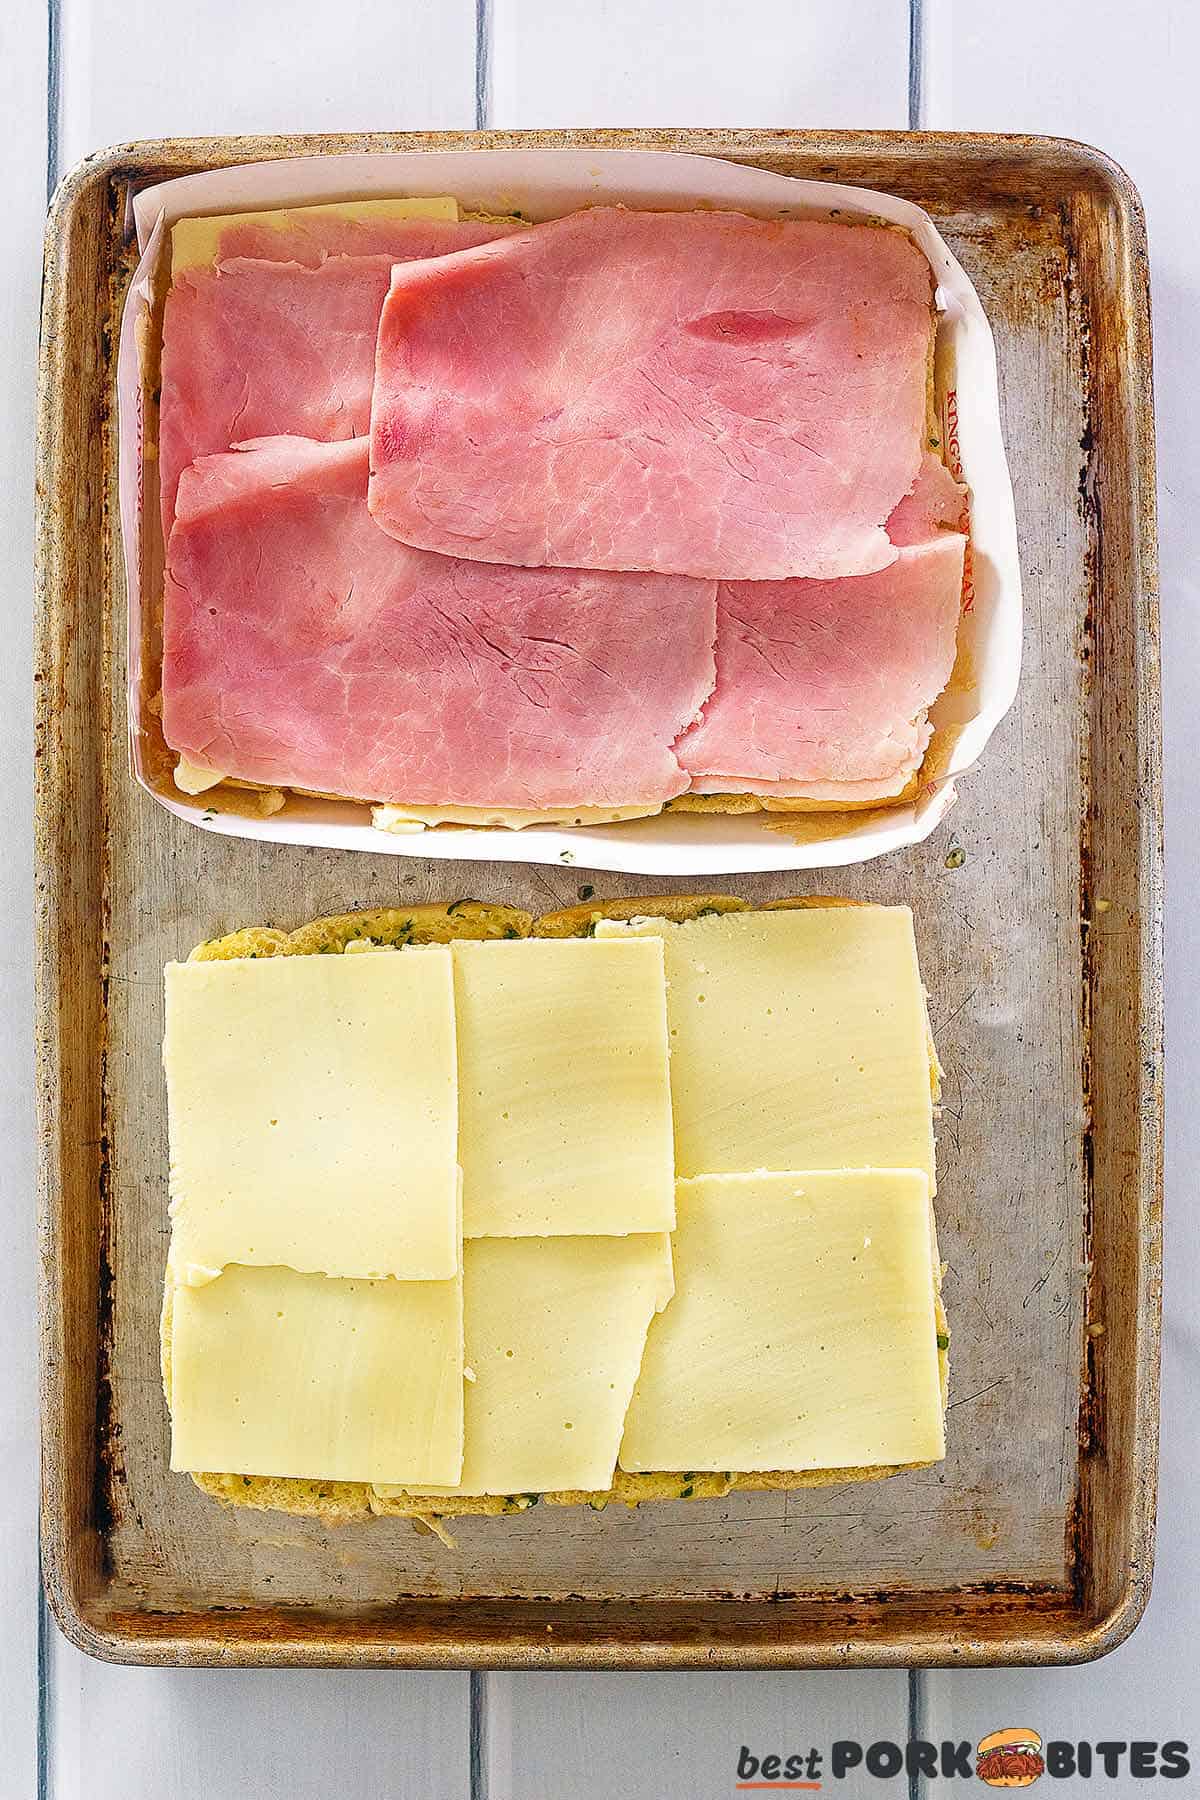 hawaiian rolls layered with ham and cheese on a baking tray